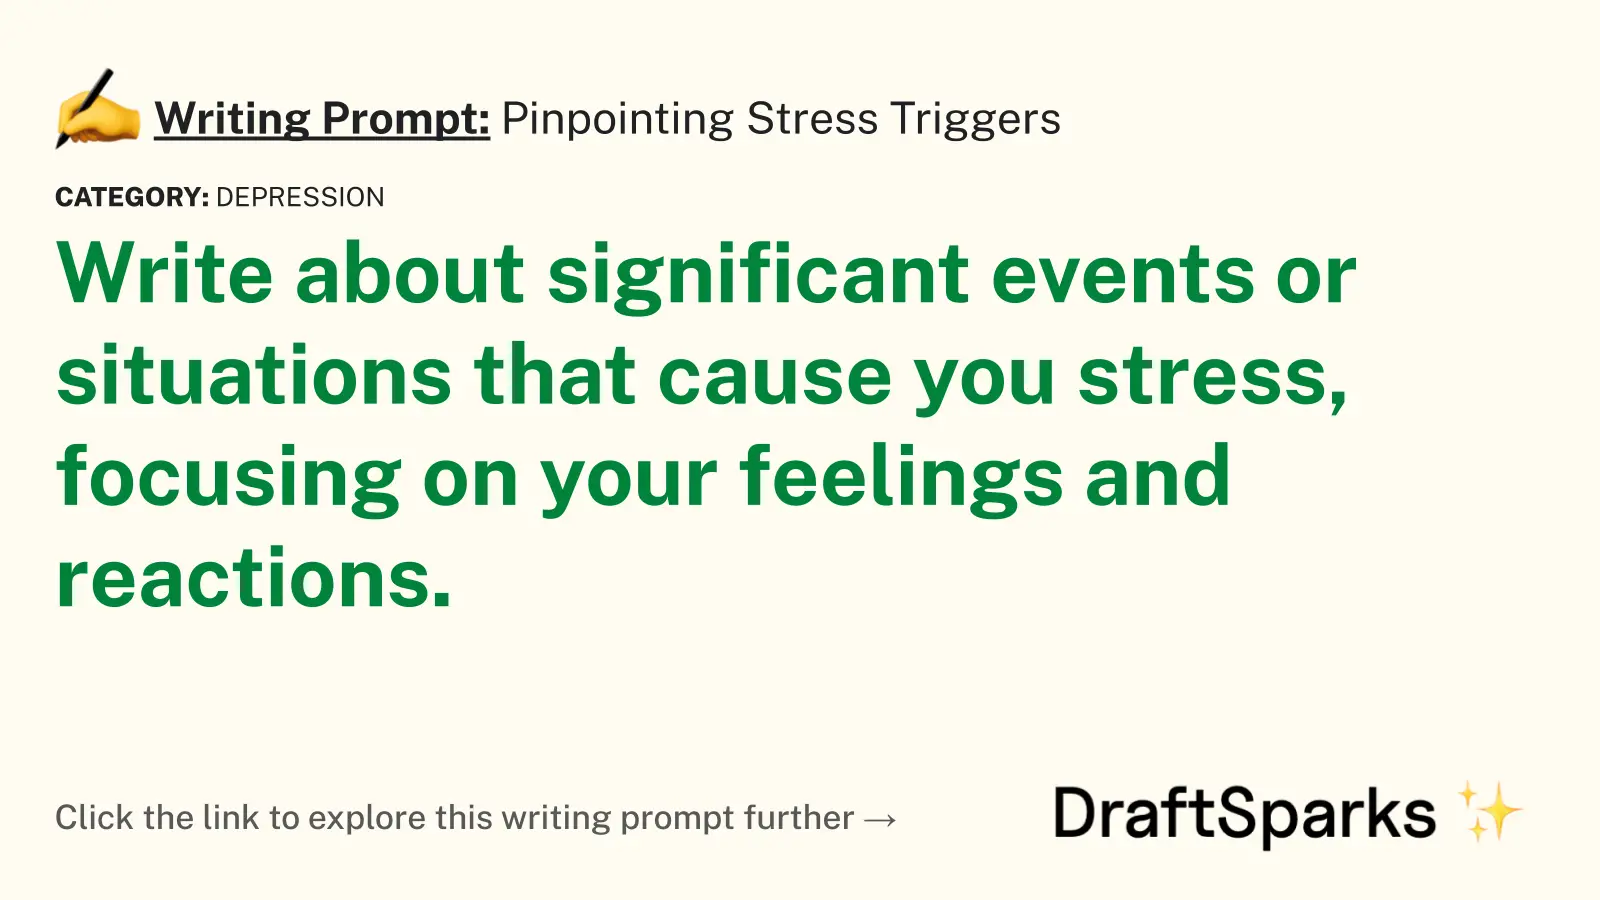 Pinpointing Stress Triggers